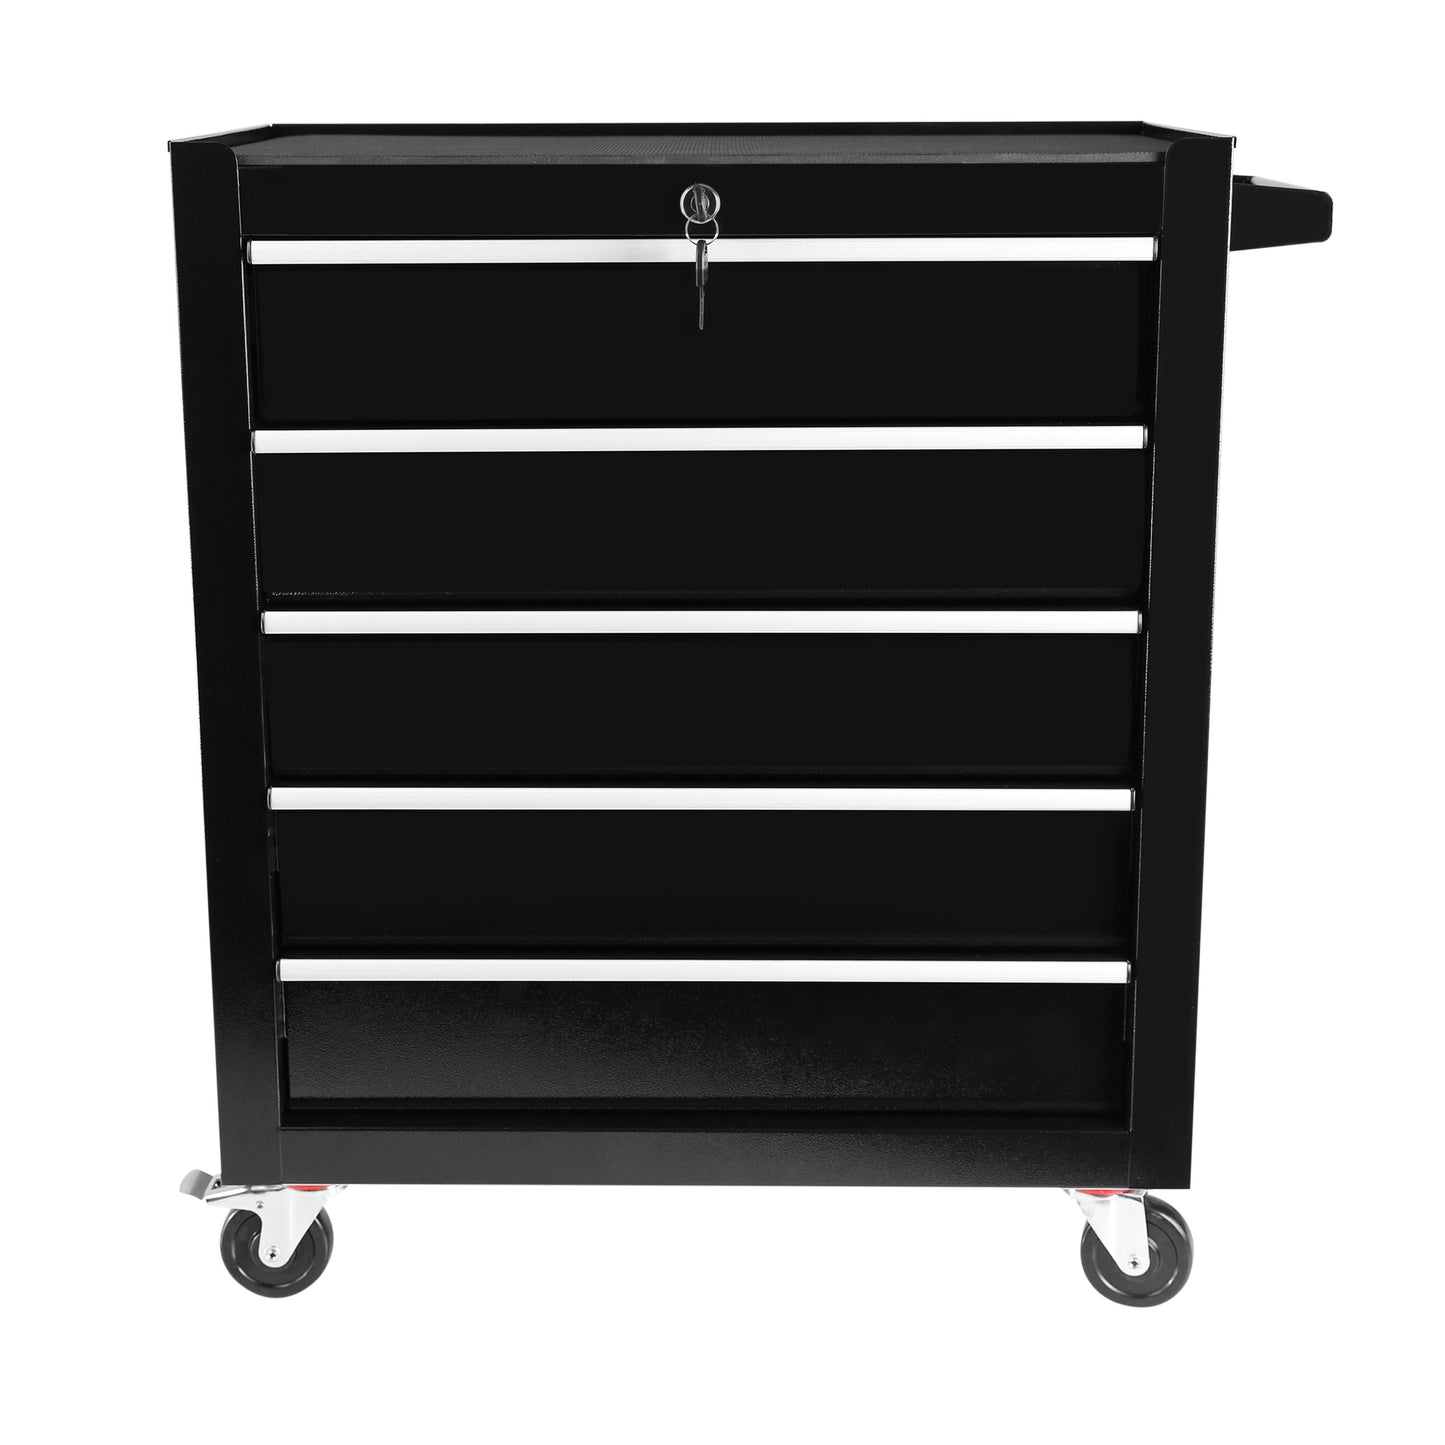 5 Drawers Rolling Tool Chest Cabinet with Wheels, Tool Storage Cabinet and Tool Box Organizer for Garage Warehouse Workshop, Black